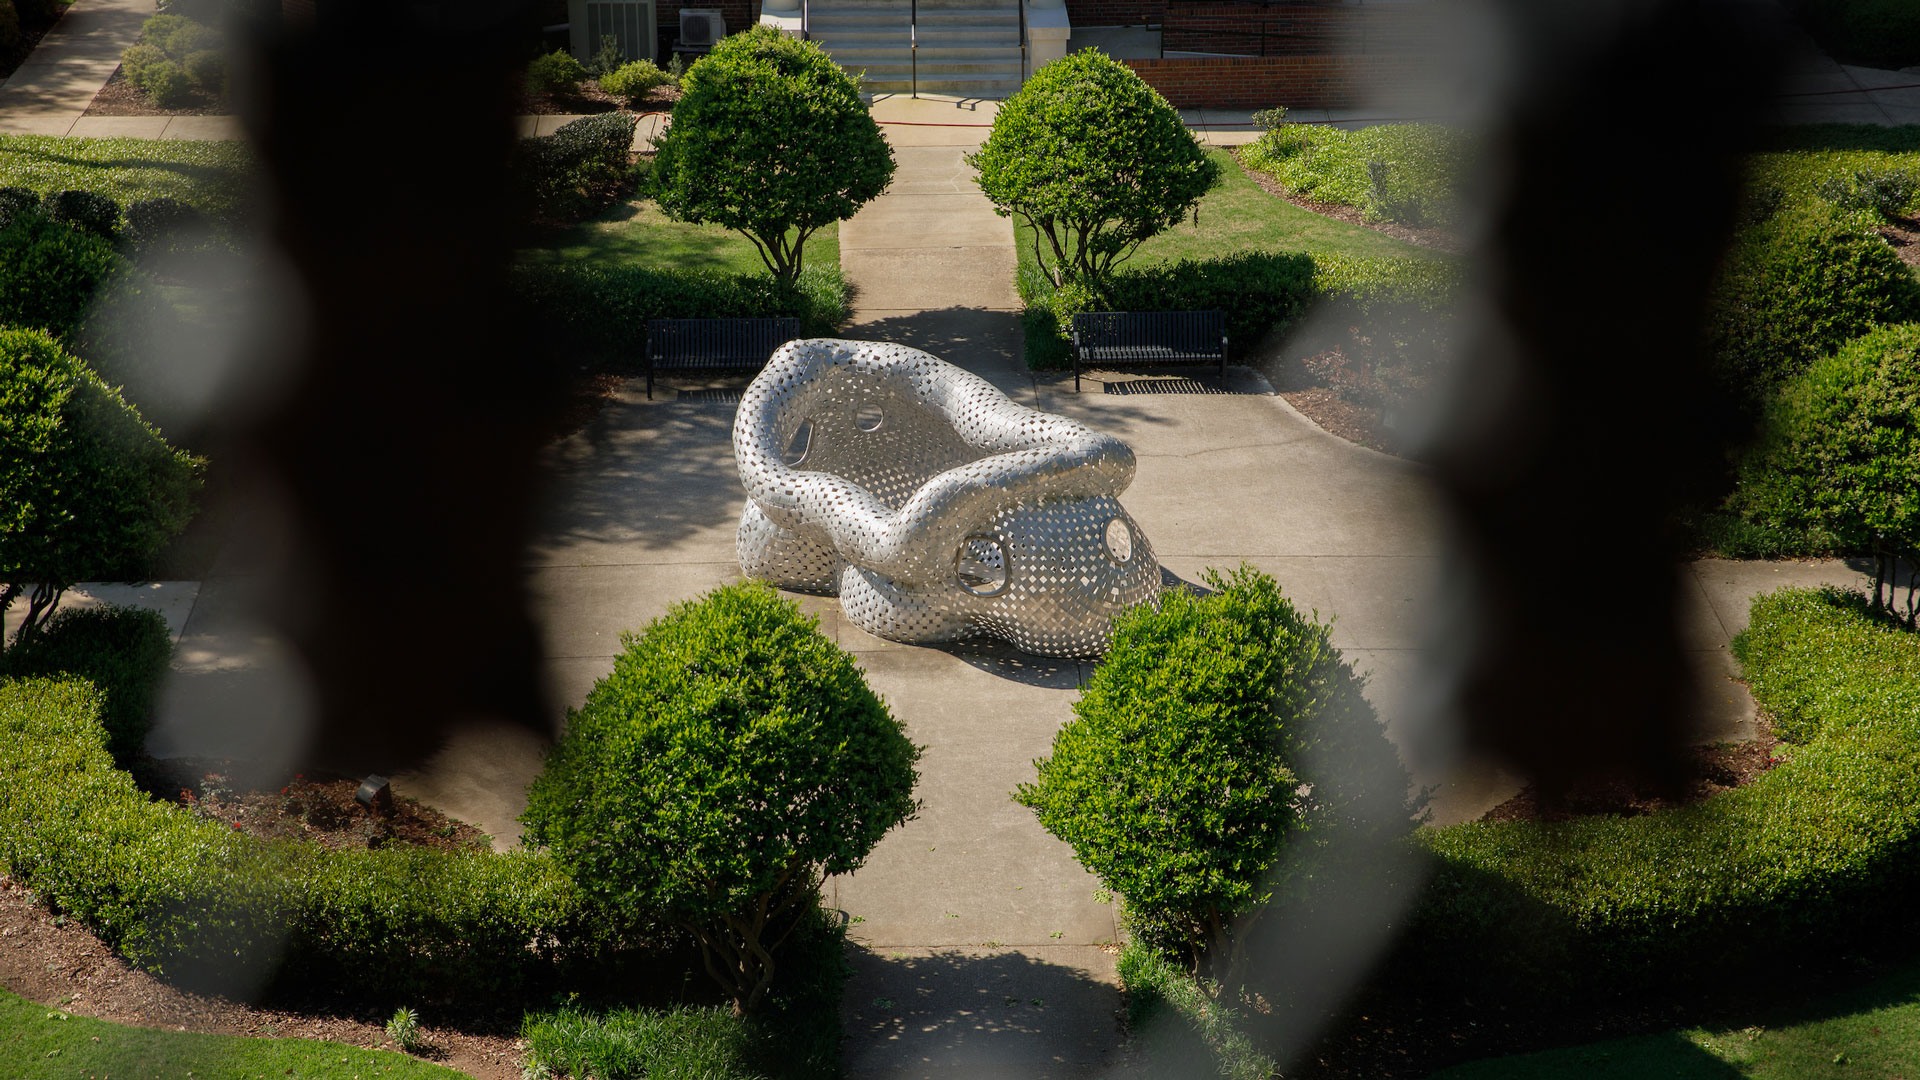 photograph of a silver metallic sculpture at the center of the Woods Quad taken from the balcony